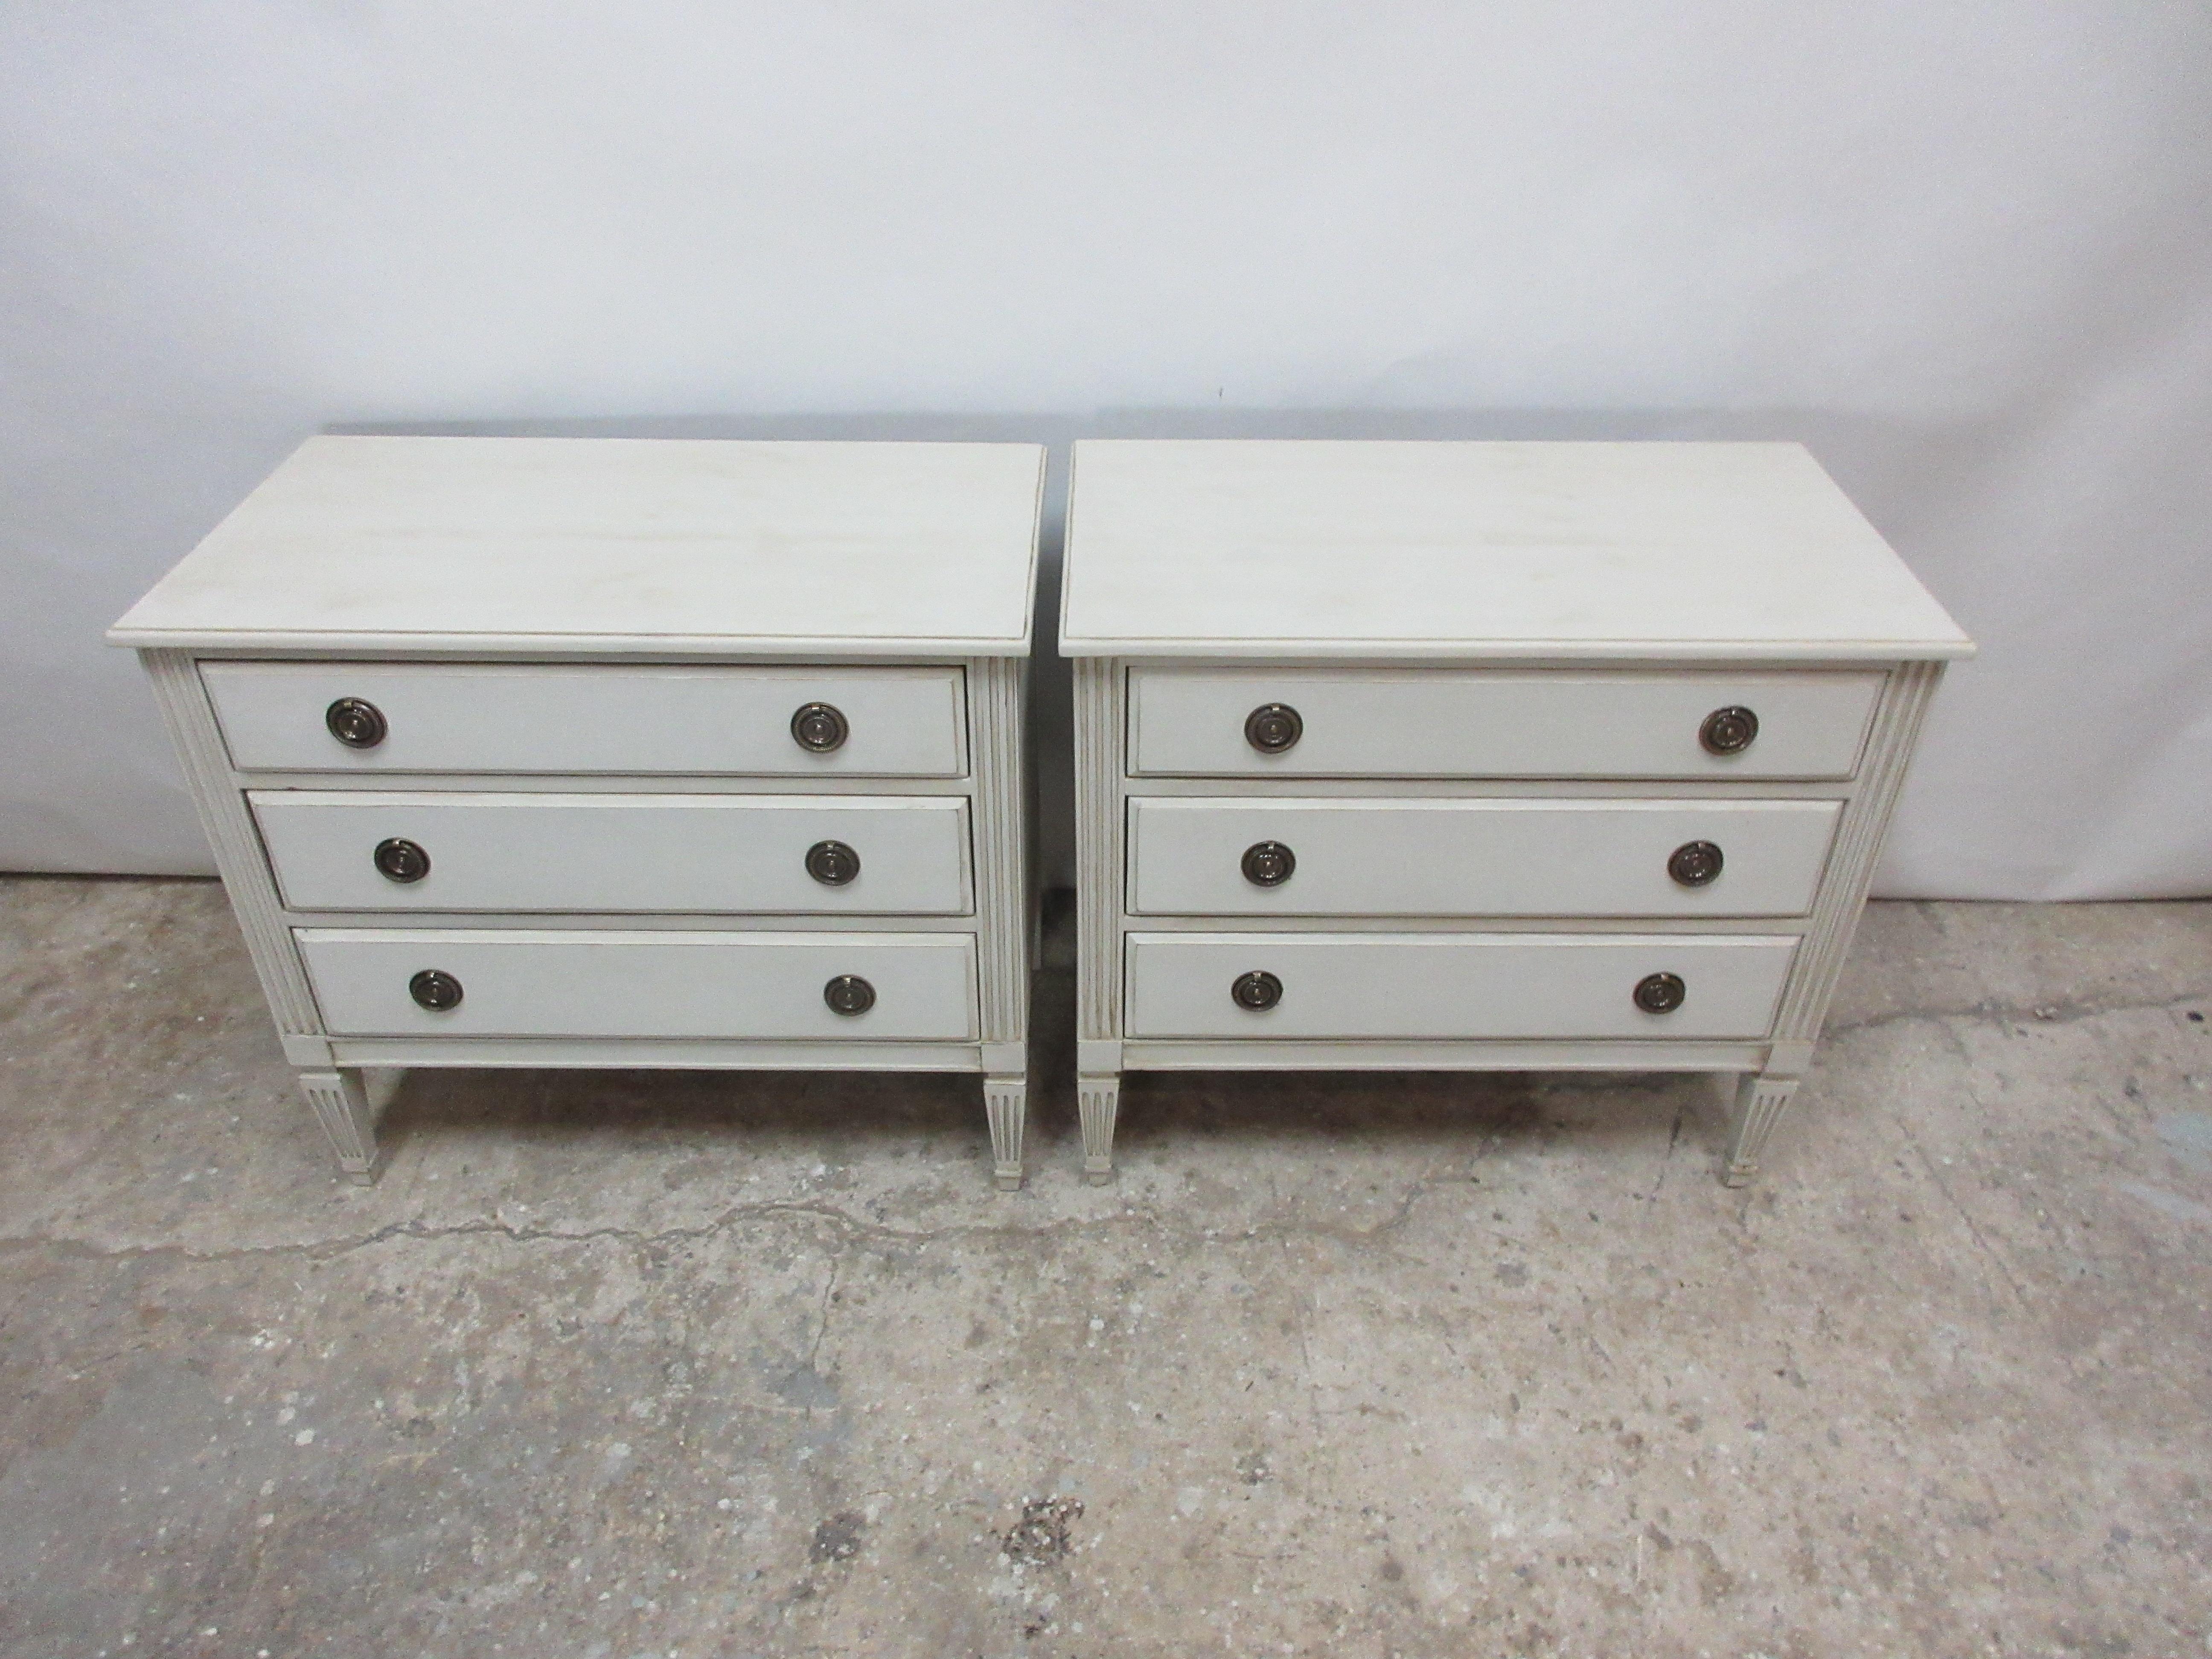 This is a set of 2 Gustavian style chest of drawers. They have been restored and repainted with milk paints 